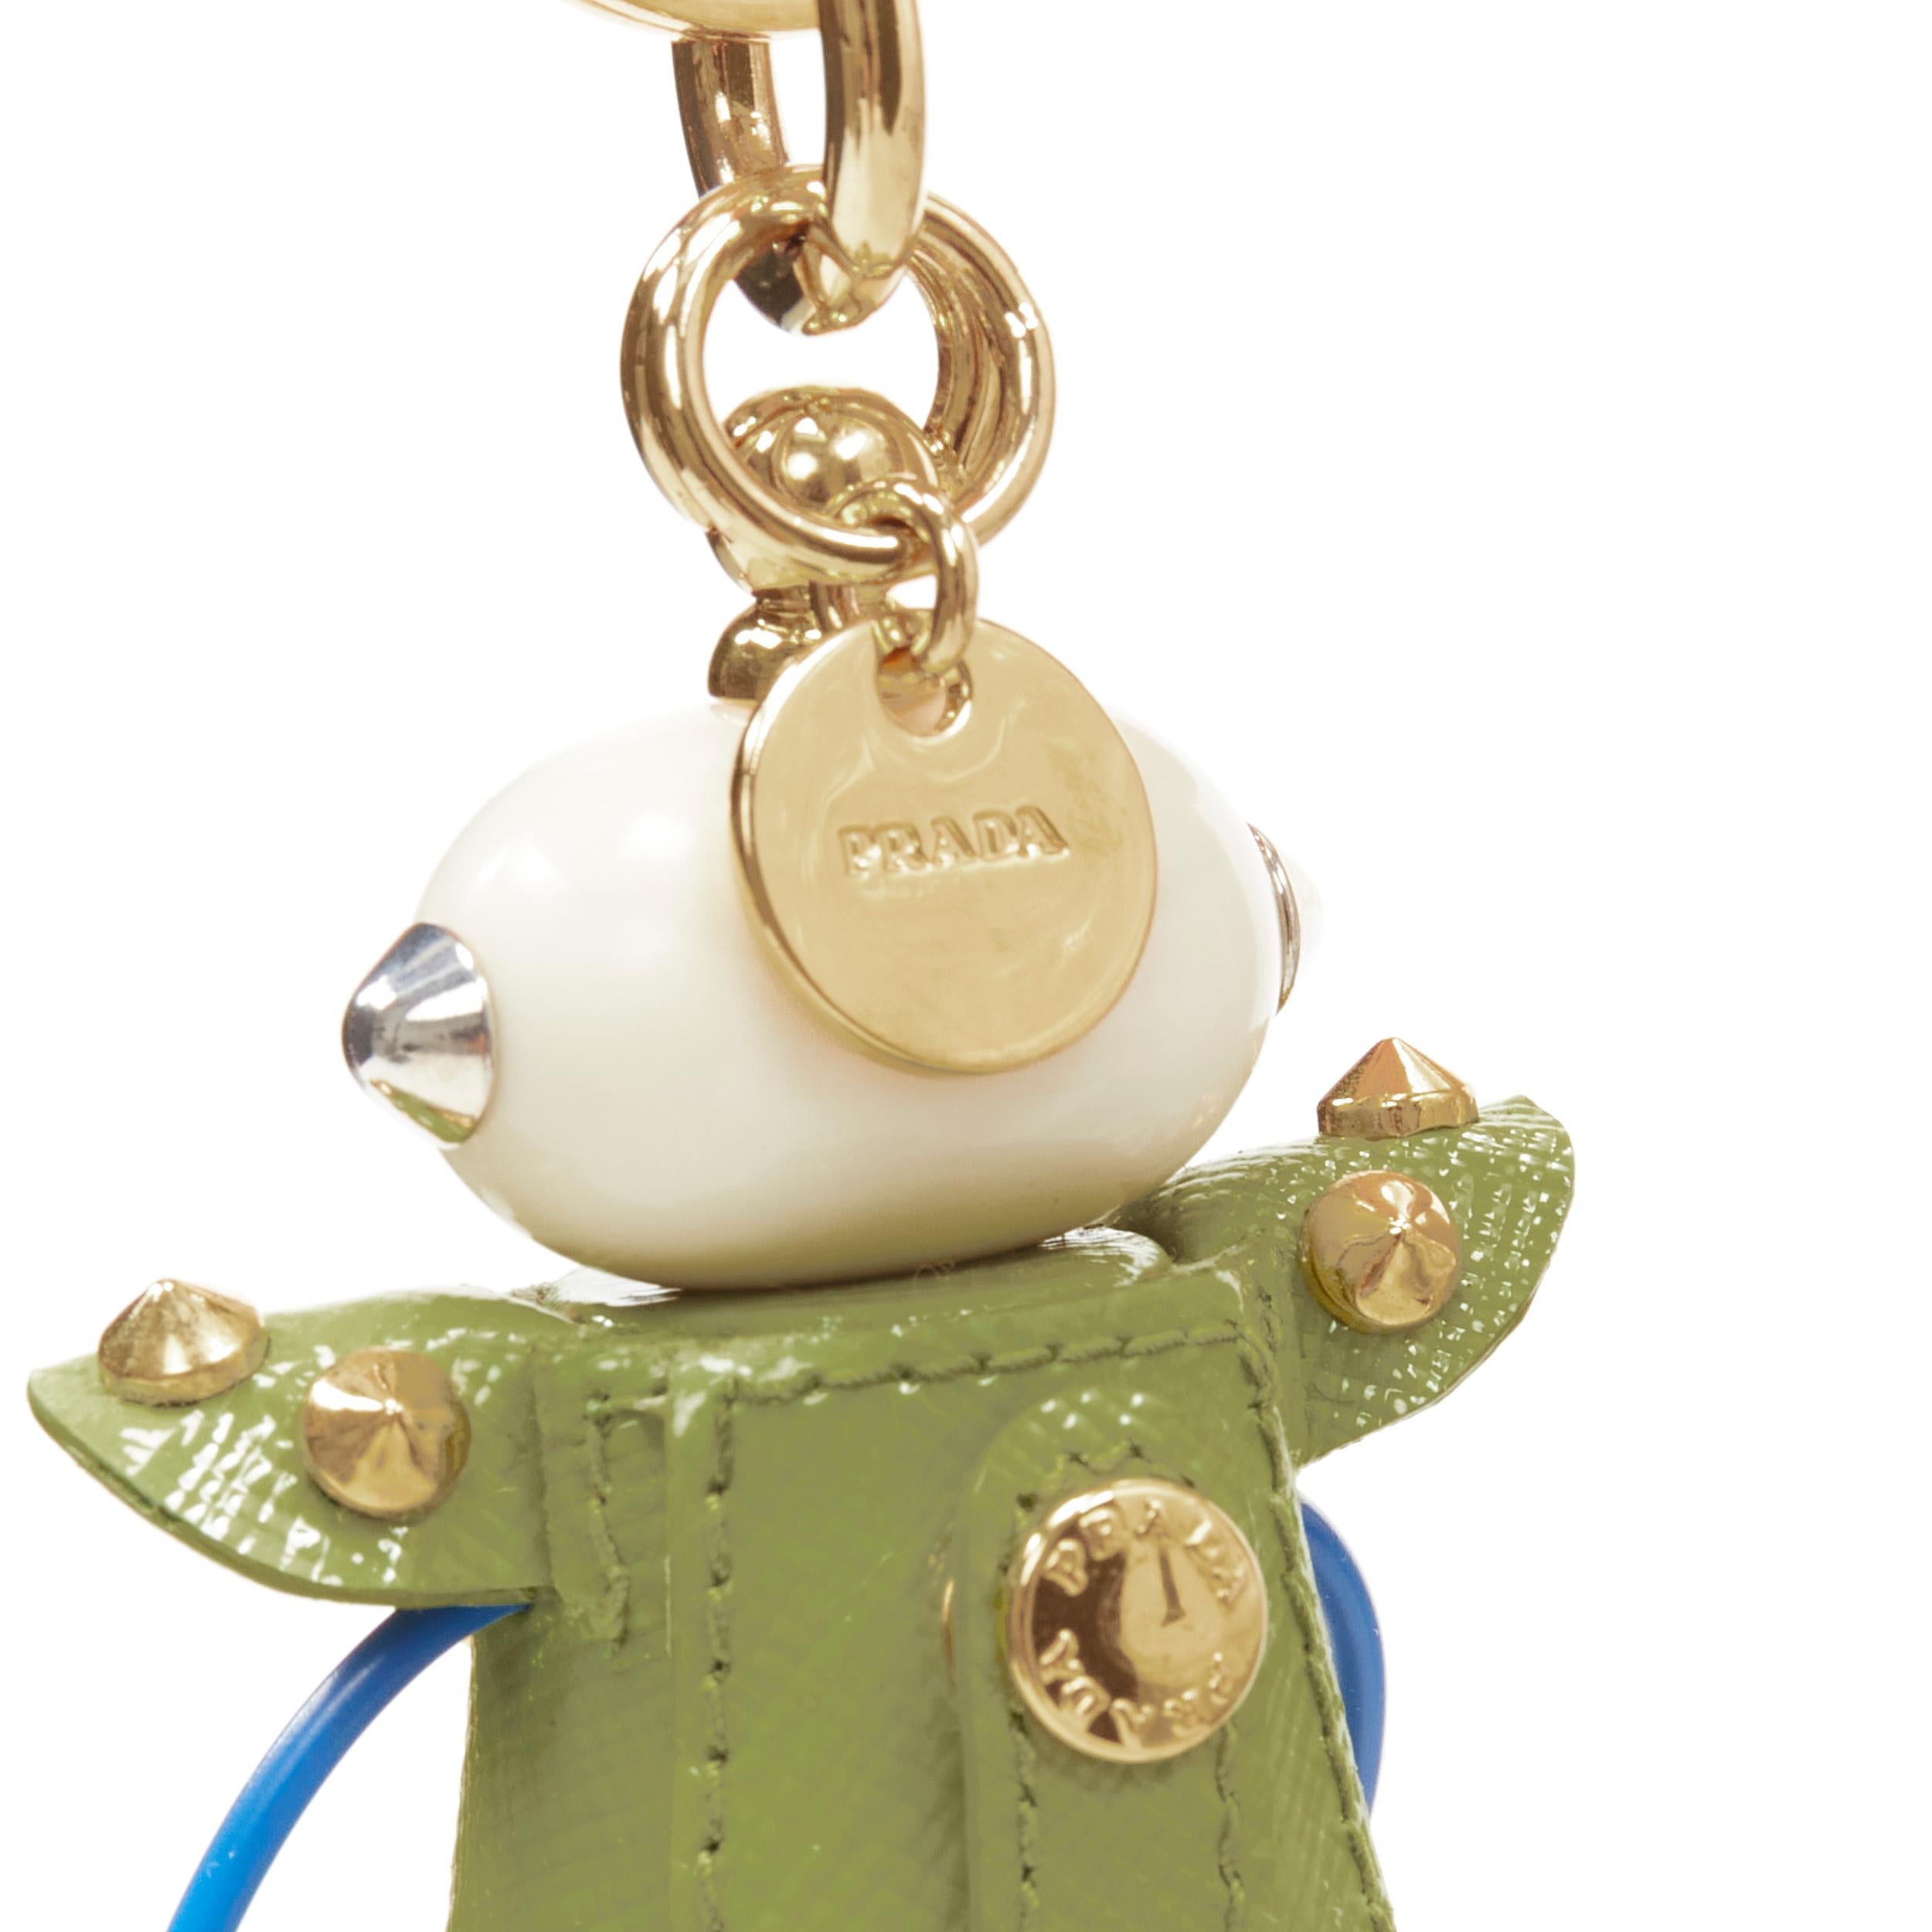 PRADA Robot green saffiano leather gold studded bolts hardware keyring bag charm 
Reference: ANWU/A00112 
Brand: Prada 
Designer: Miuccia Prada 
Collection: Robot 
Material: Leather 
Color: Green 
Pattern: Solid 
Closure: Lobster 
Extra Detail: